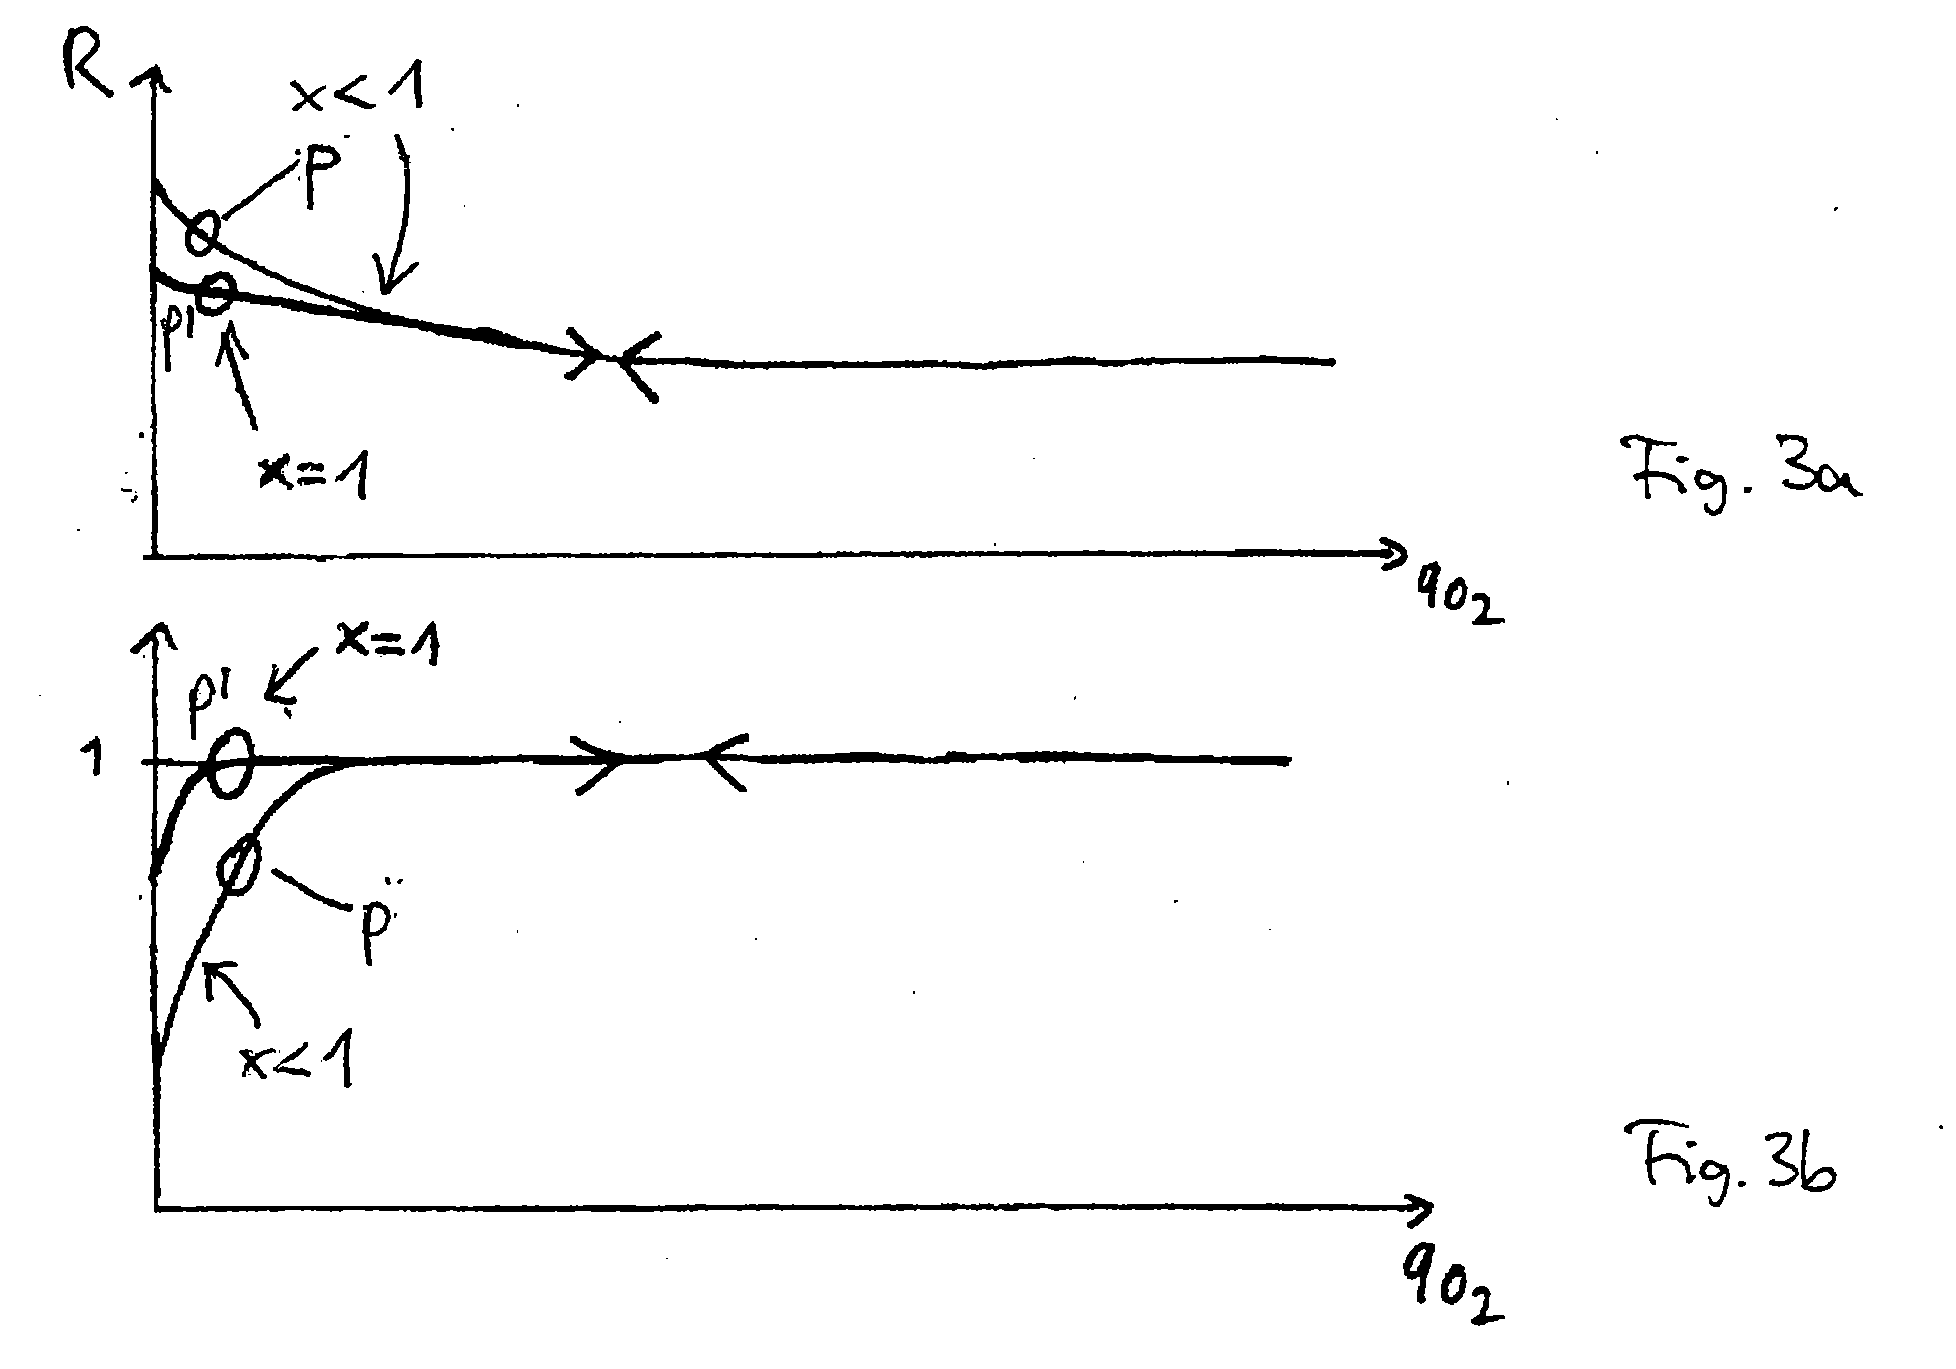 Sputter target, method for manufacturing a layer, particularly a tco (transparent conductive oxide) layer, and method for manufacturing a thin layer solar cell